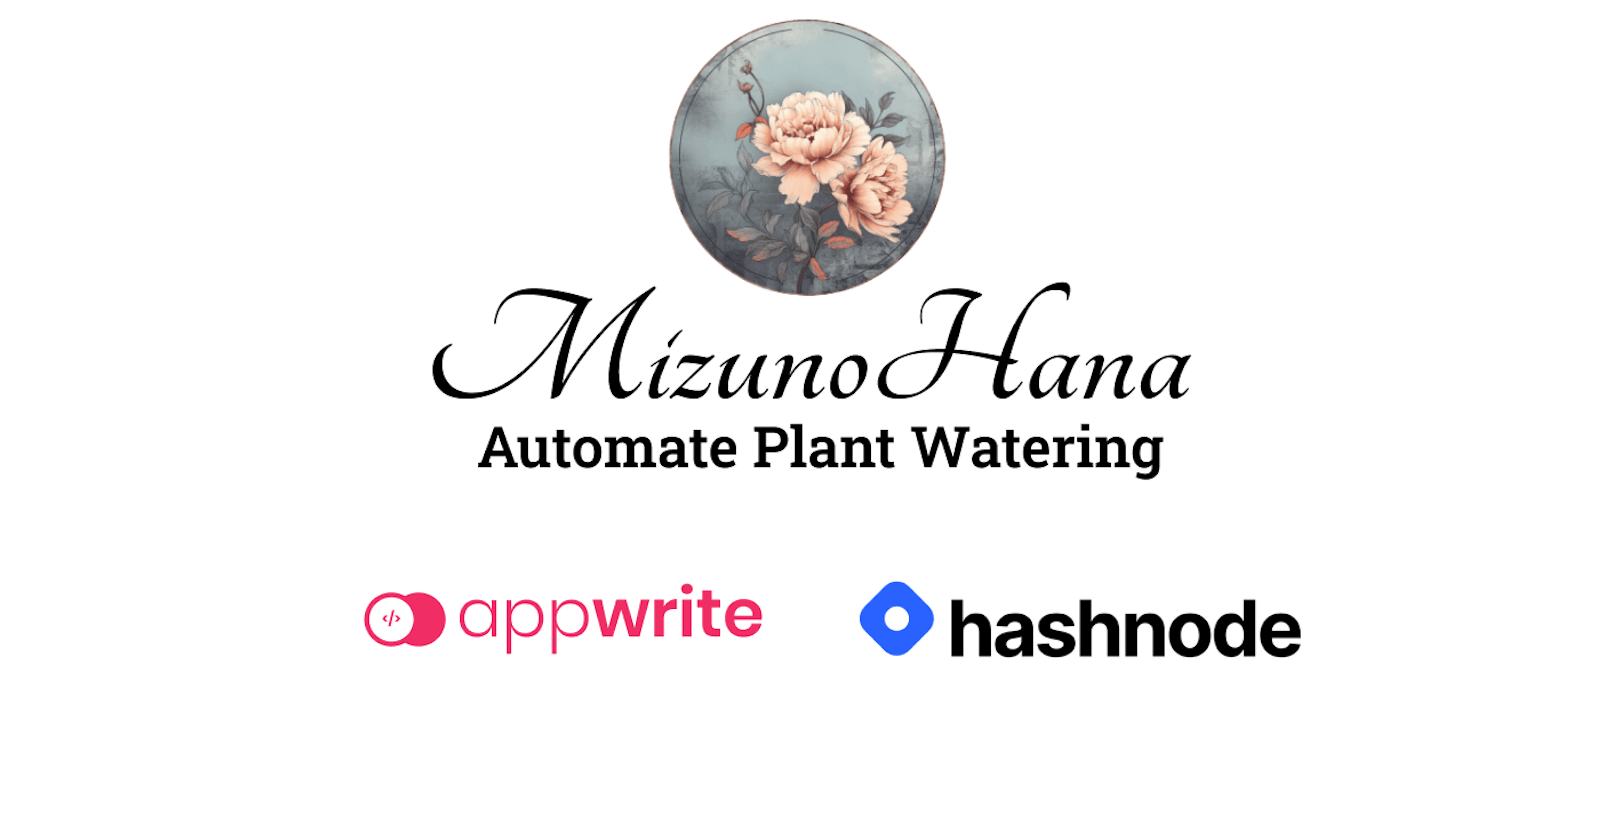 MizunoHana - Open Source Automatic Plant Watering System created using Appwrite and Arduino